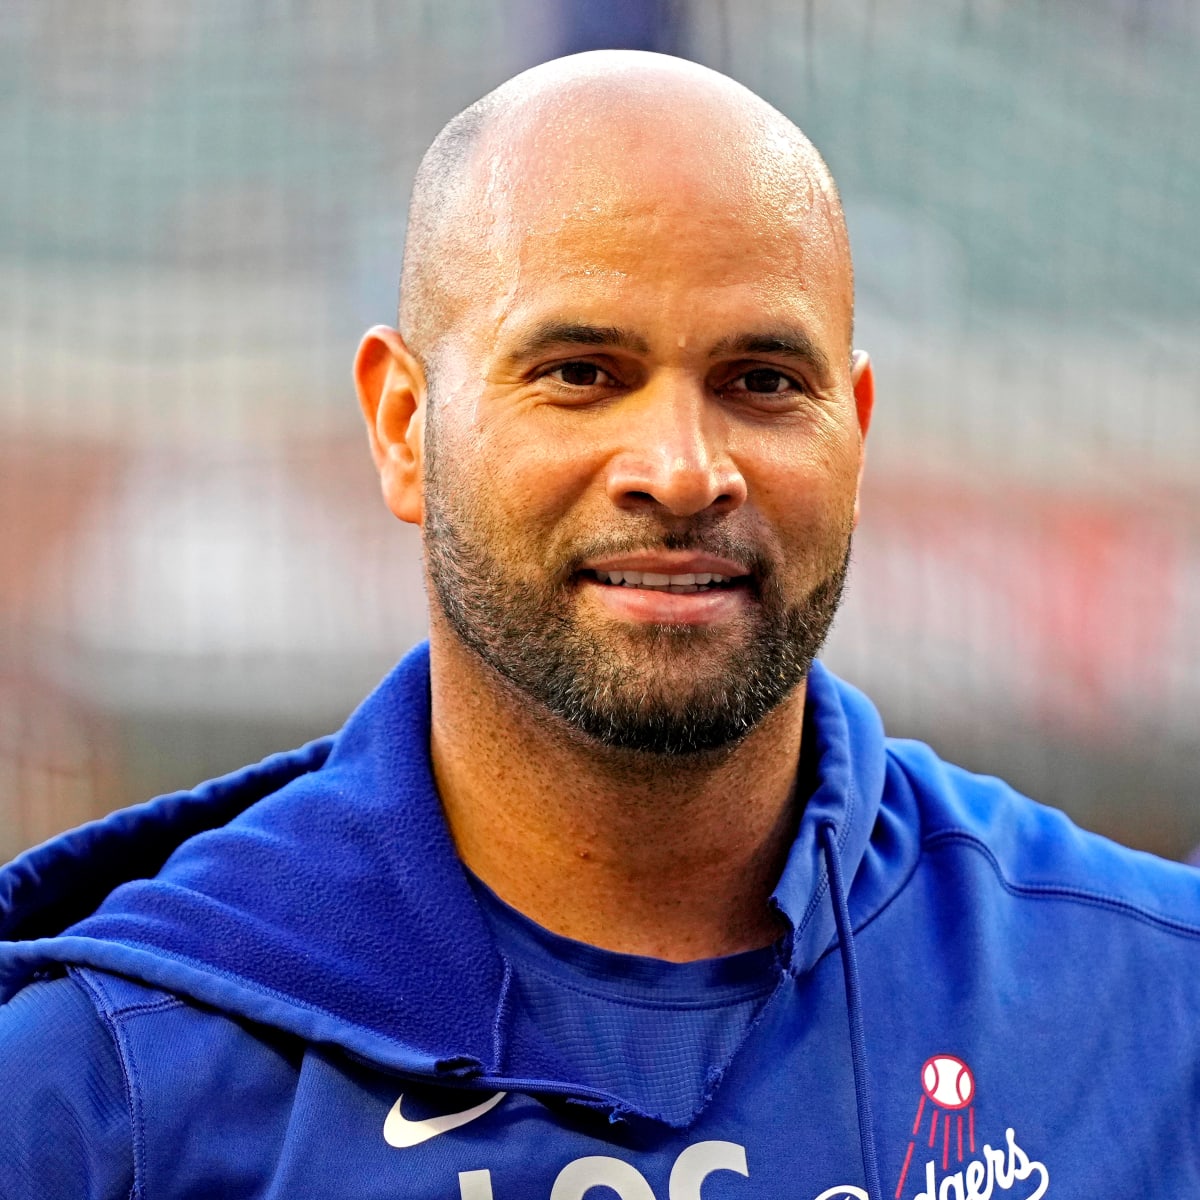 Dodgers to sign Albert Pujols to major league deal, per report - MLB Daily  Dish